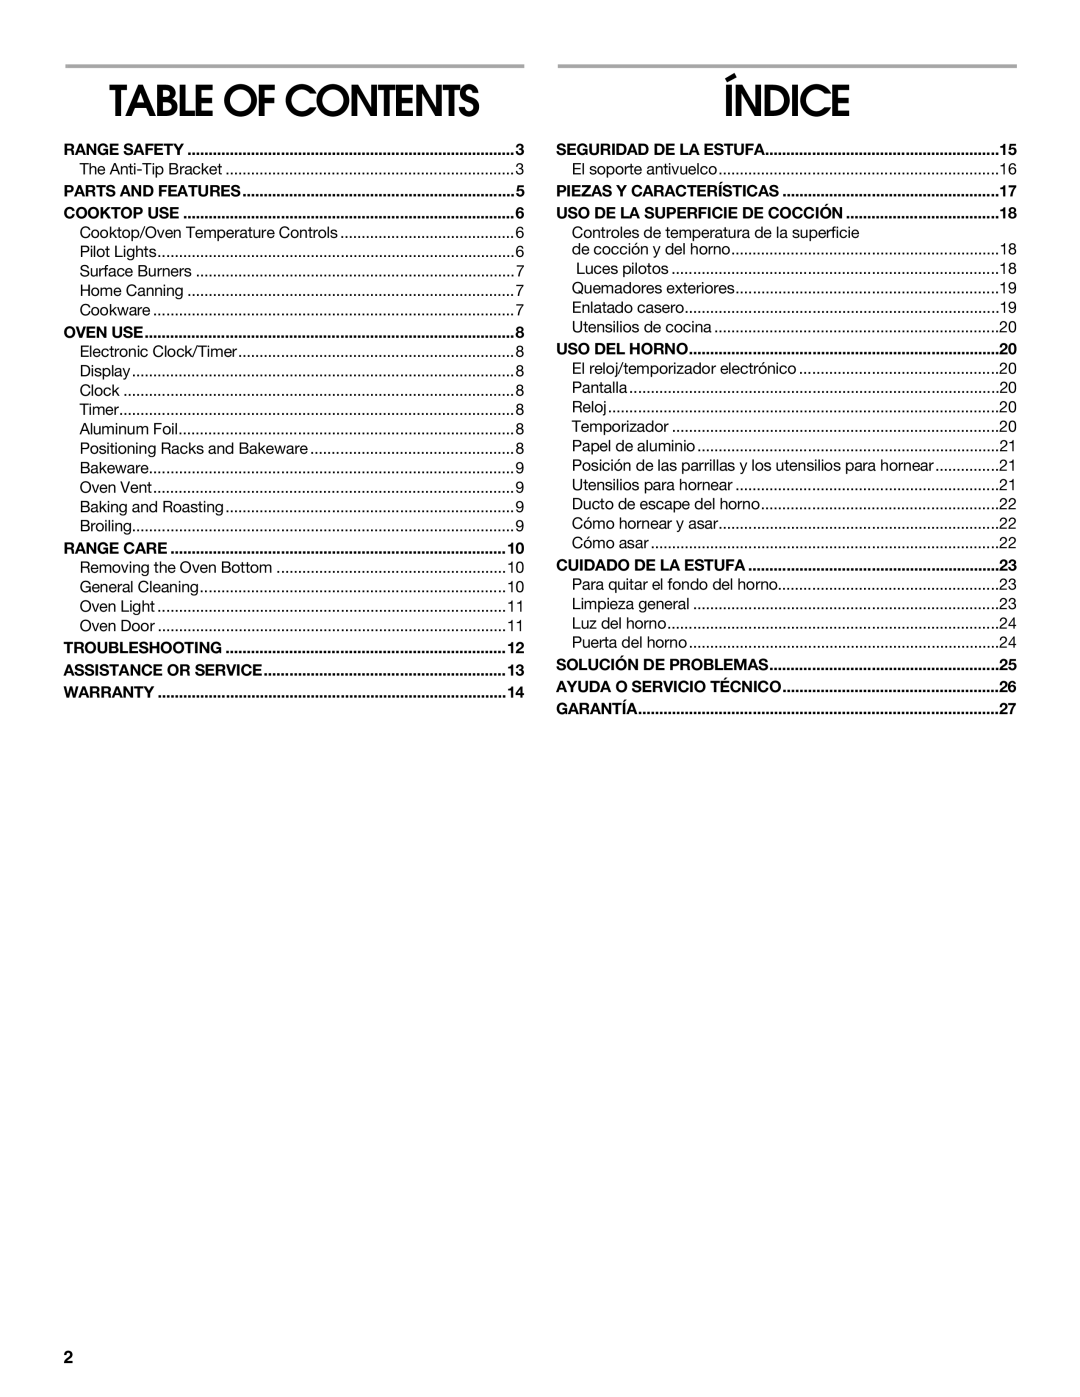 Whirlpool TGP305RV1 manual Índice, Table Of Contents 